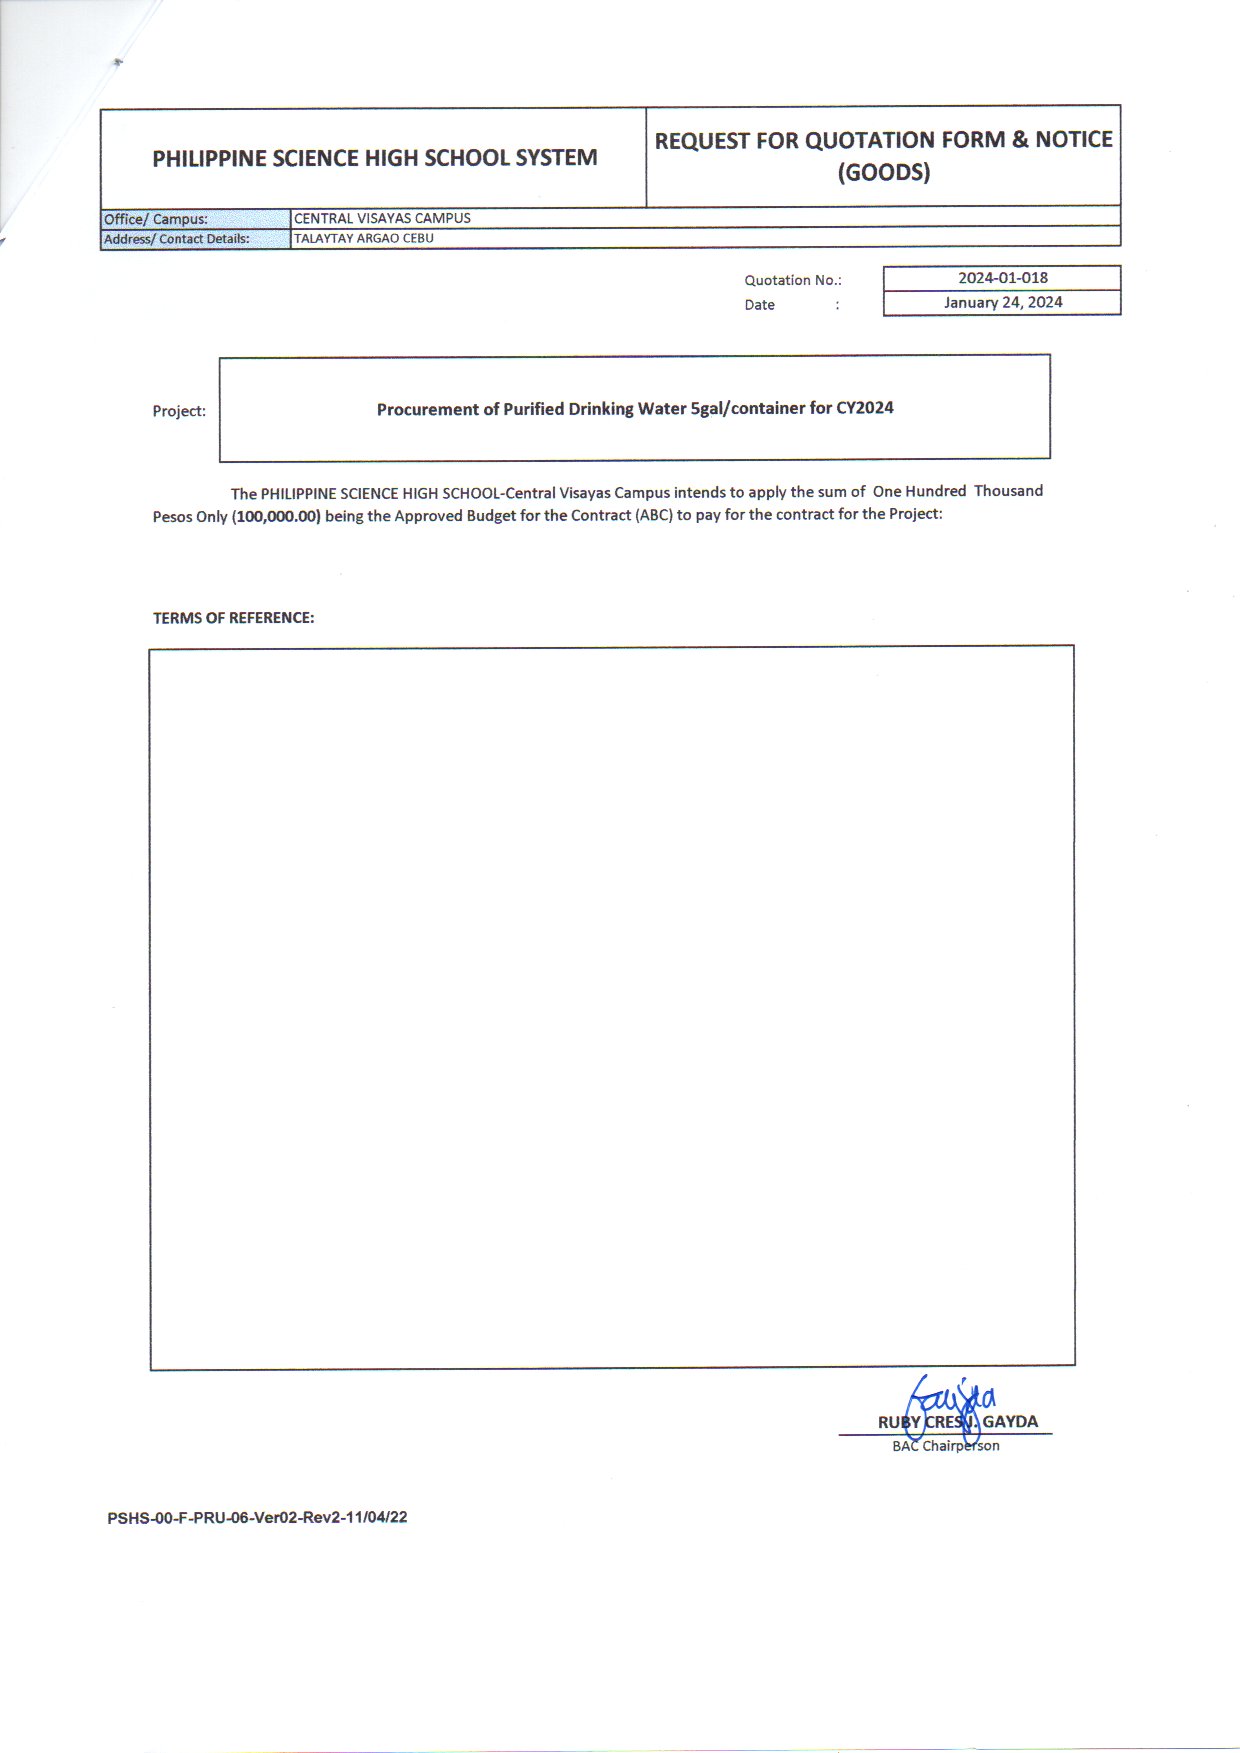 RFQ procurement purified drinking water 5gal container cy2024 p2of2